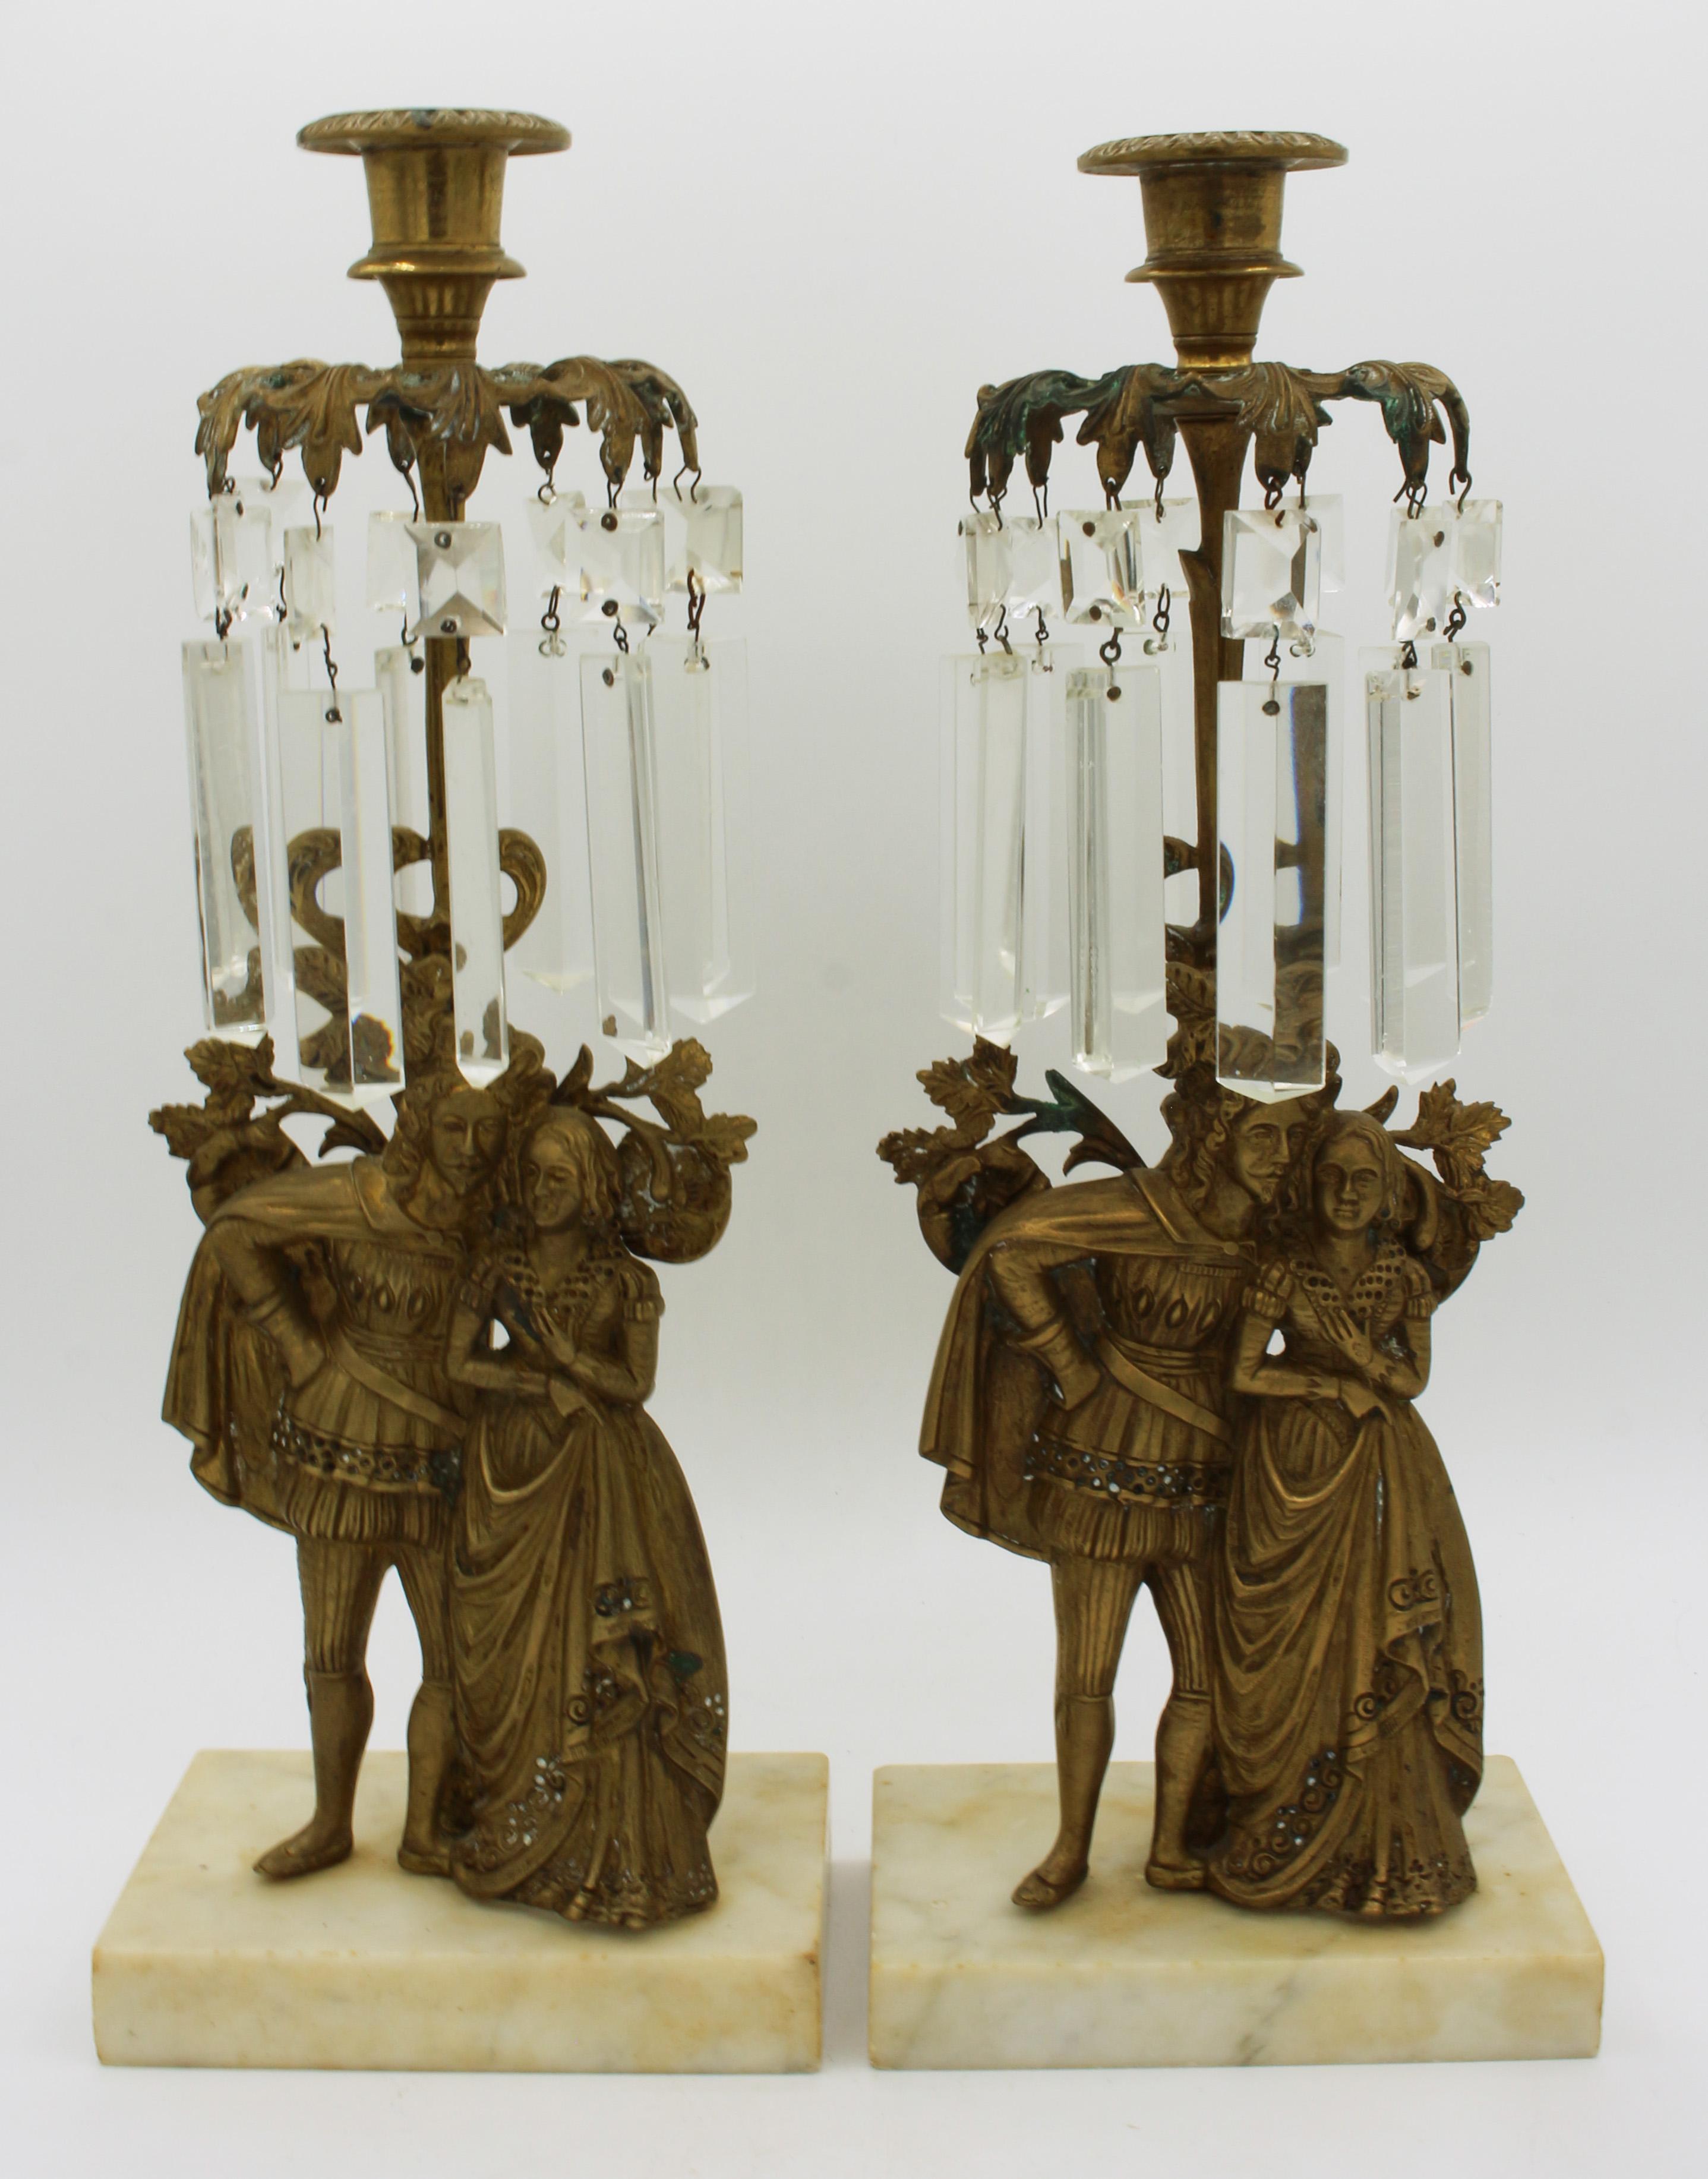 A pair of gilt bronze girandoles on marble bases. c.1850-65. Featuring an elegant young woman in elaborate gown with fan. Cut crystal (a few chips) often associated with several Philadelphia makers. Marble bases with typical chipping. Measures: 15